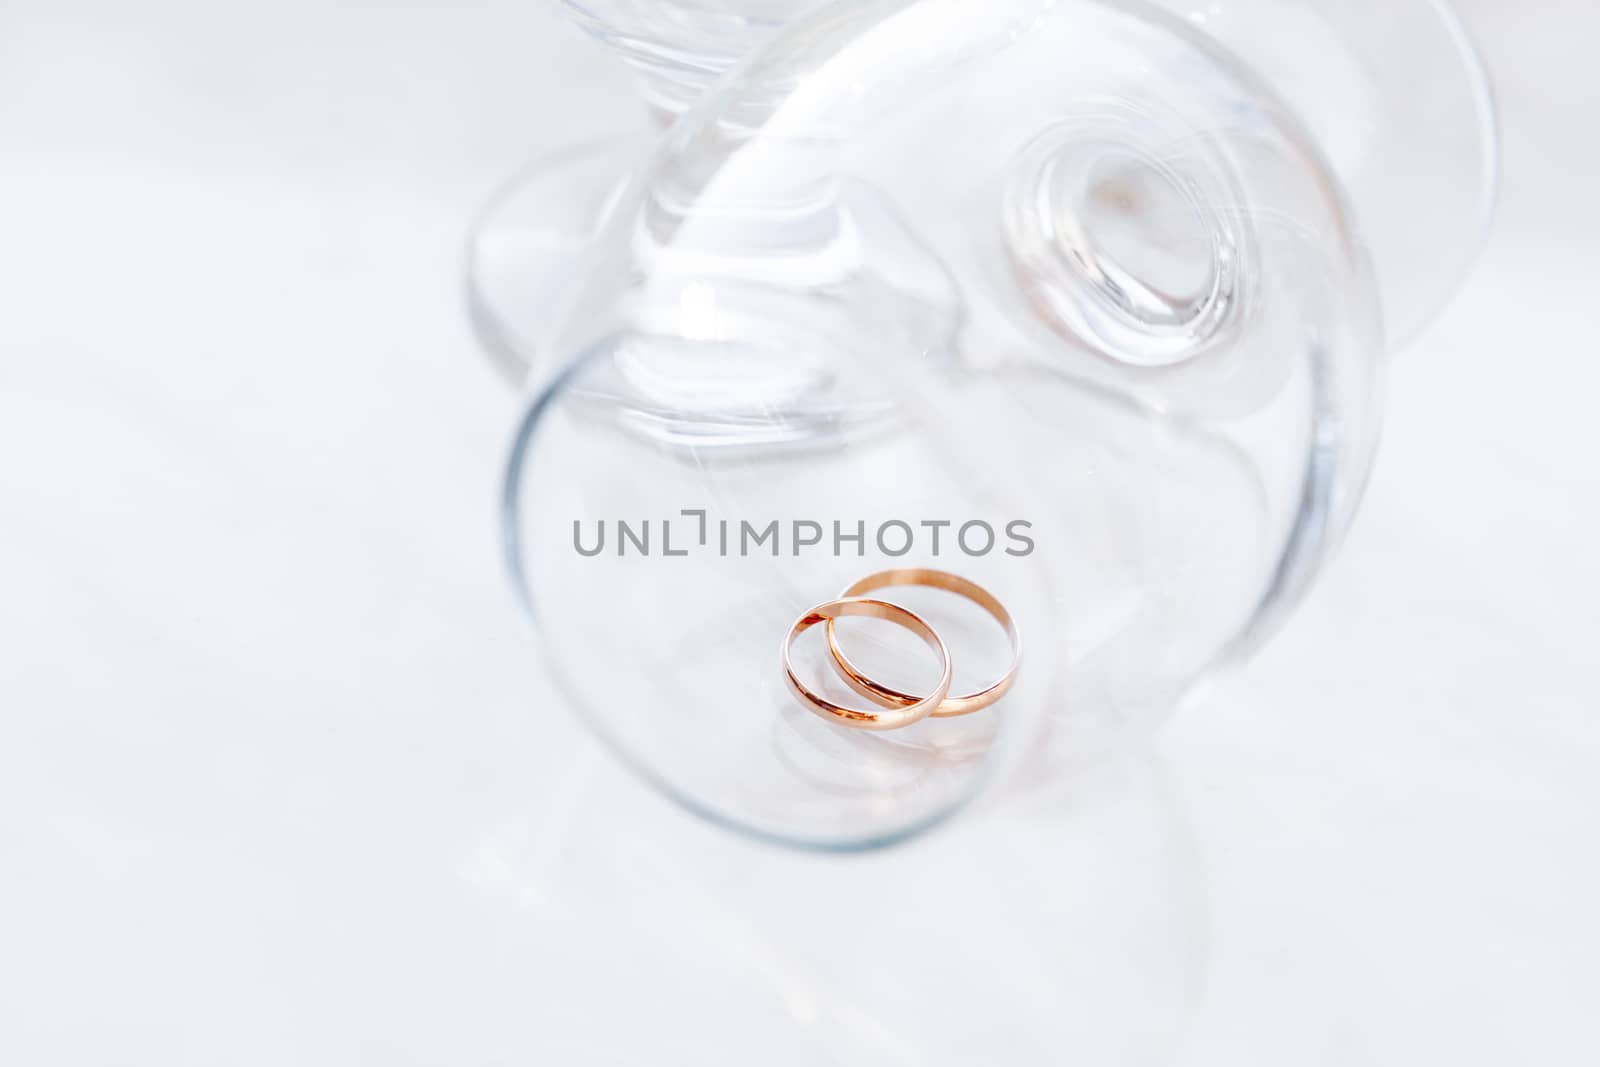 Golden wedding rings inside transparent wine glass. Symbol of love and marriage.